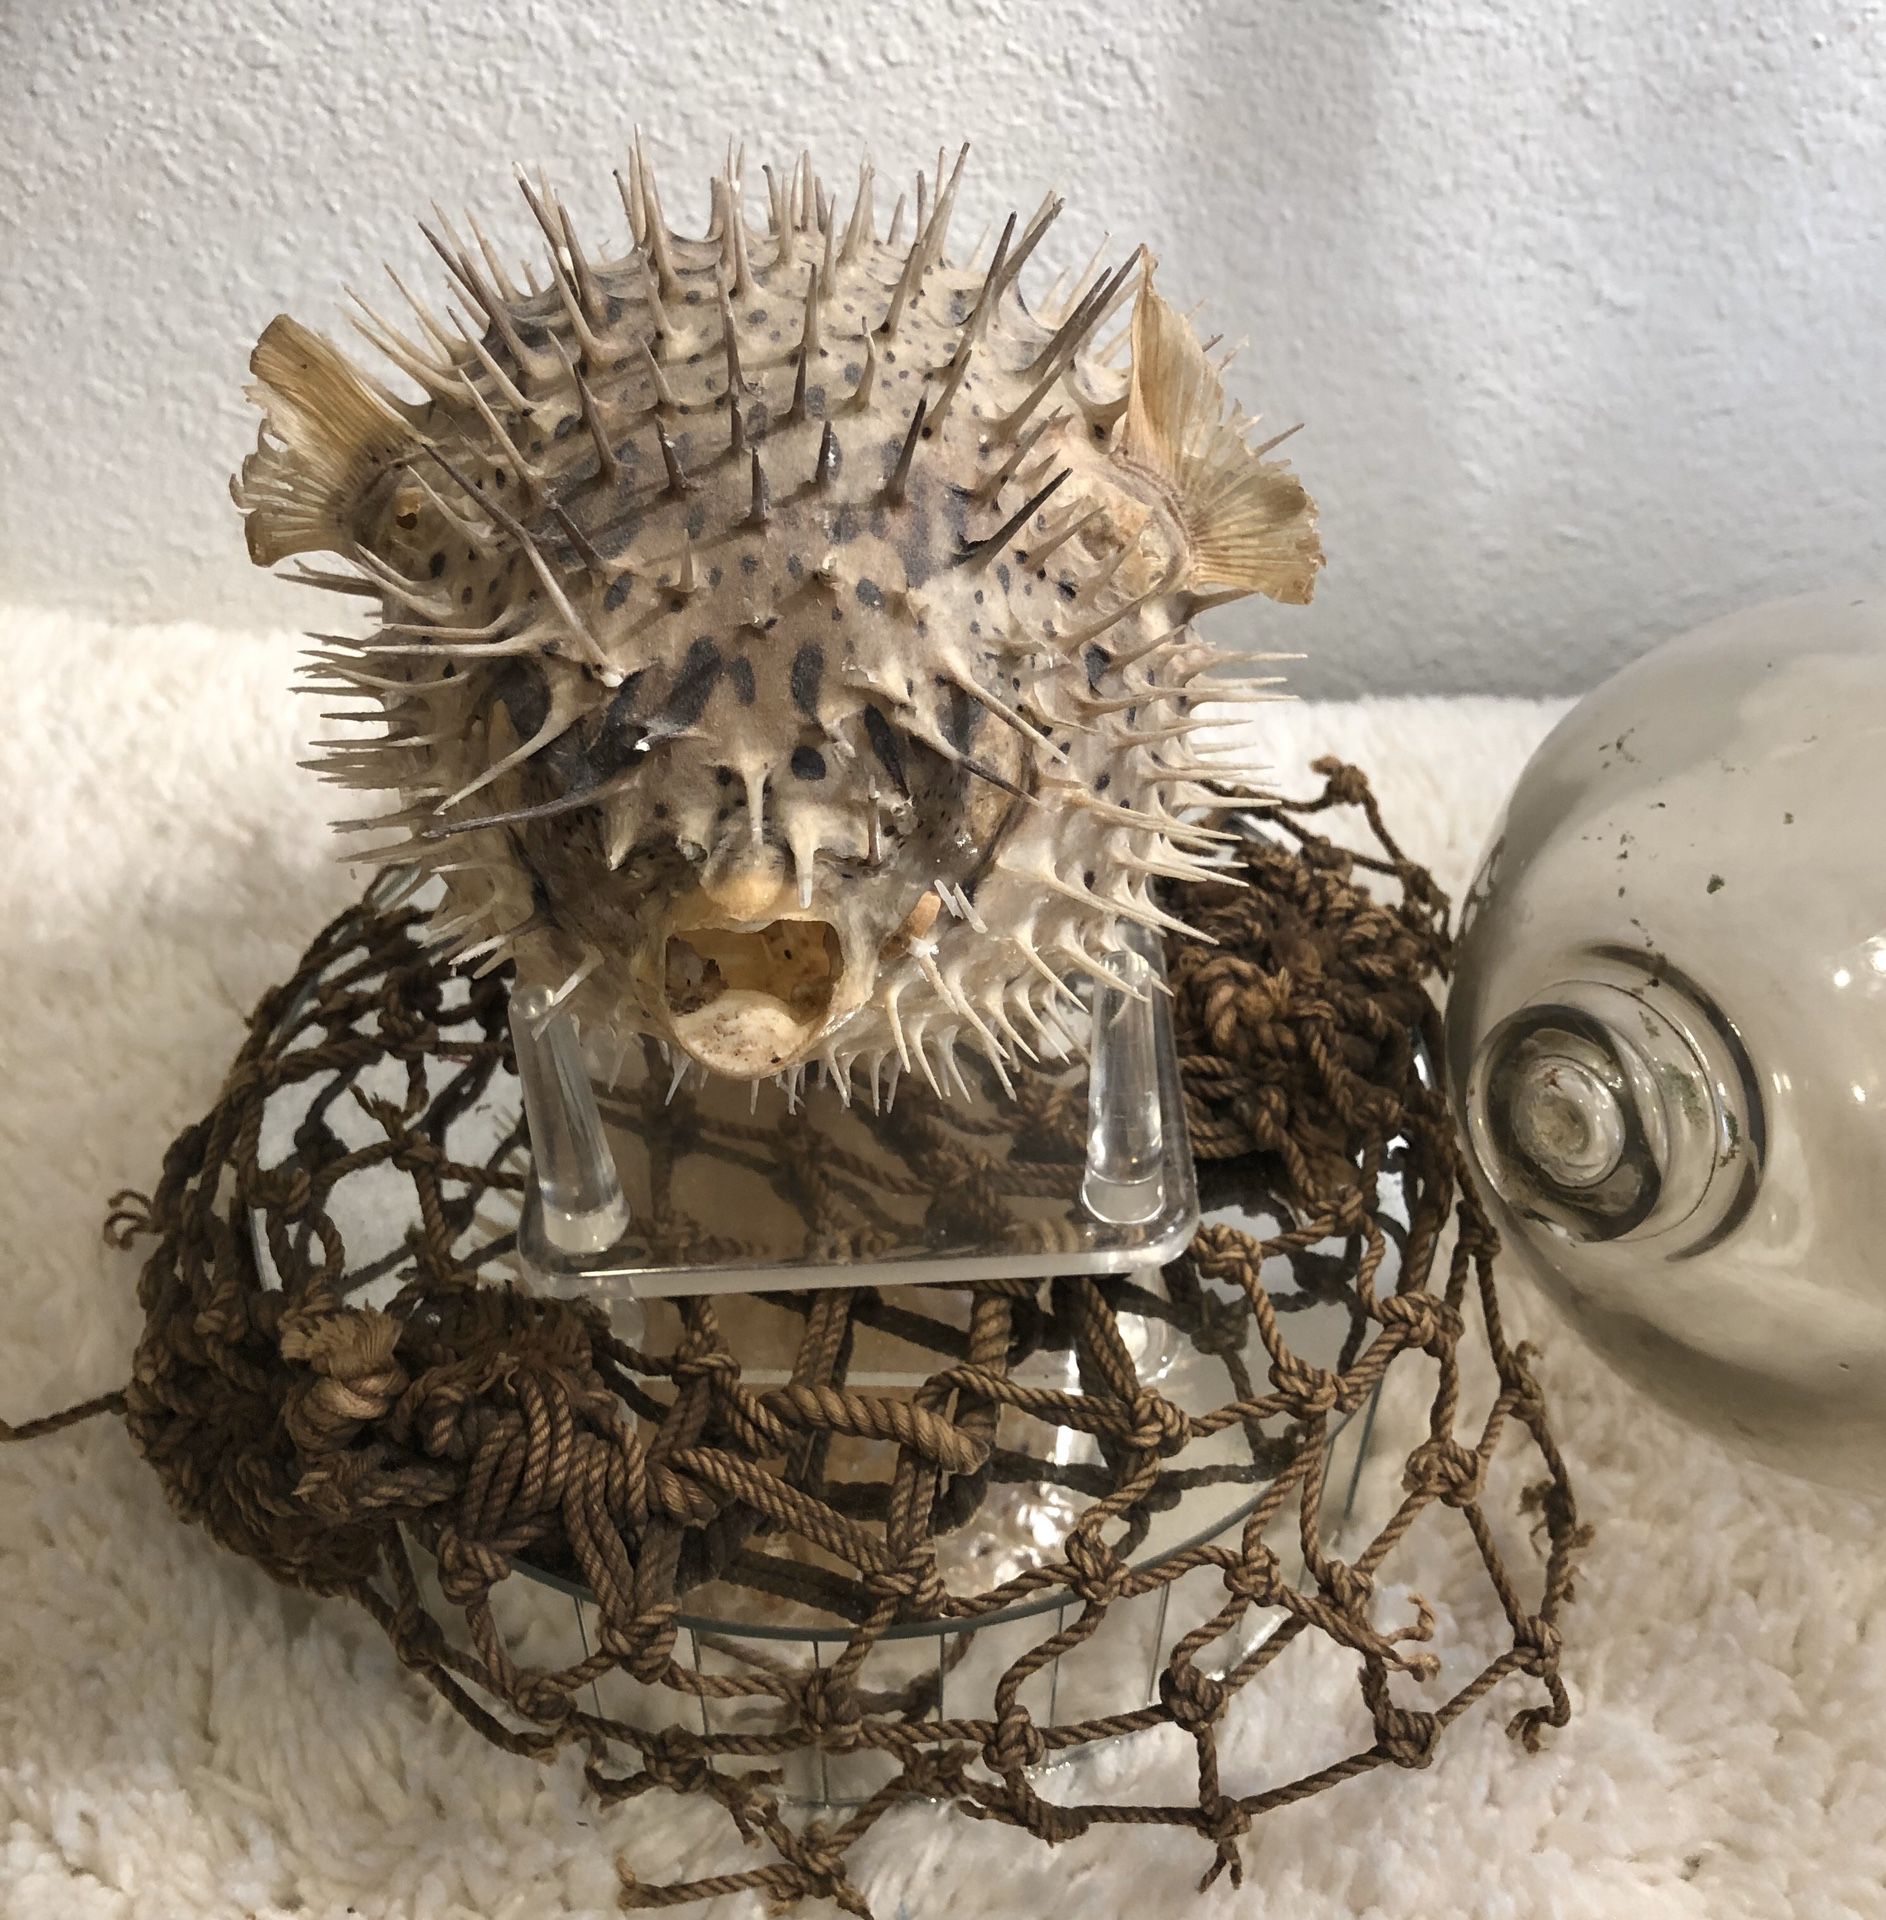 VINTAGE TAXIDERMY BLOW FISH 🐡 ODDITIES NAUTICAL BEACH OCEAN THEMED HOME DECOR COLLECTIBLE 🐡🐡🐡